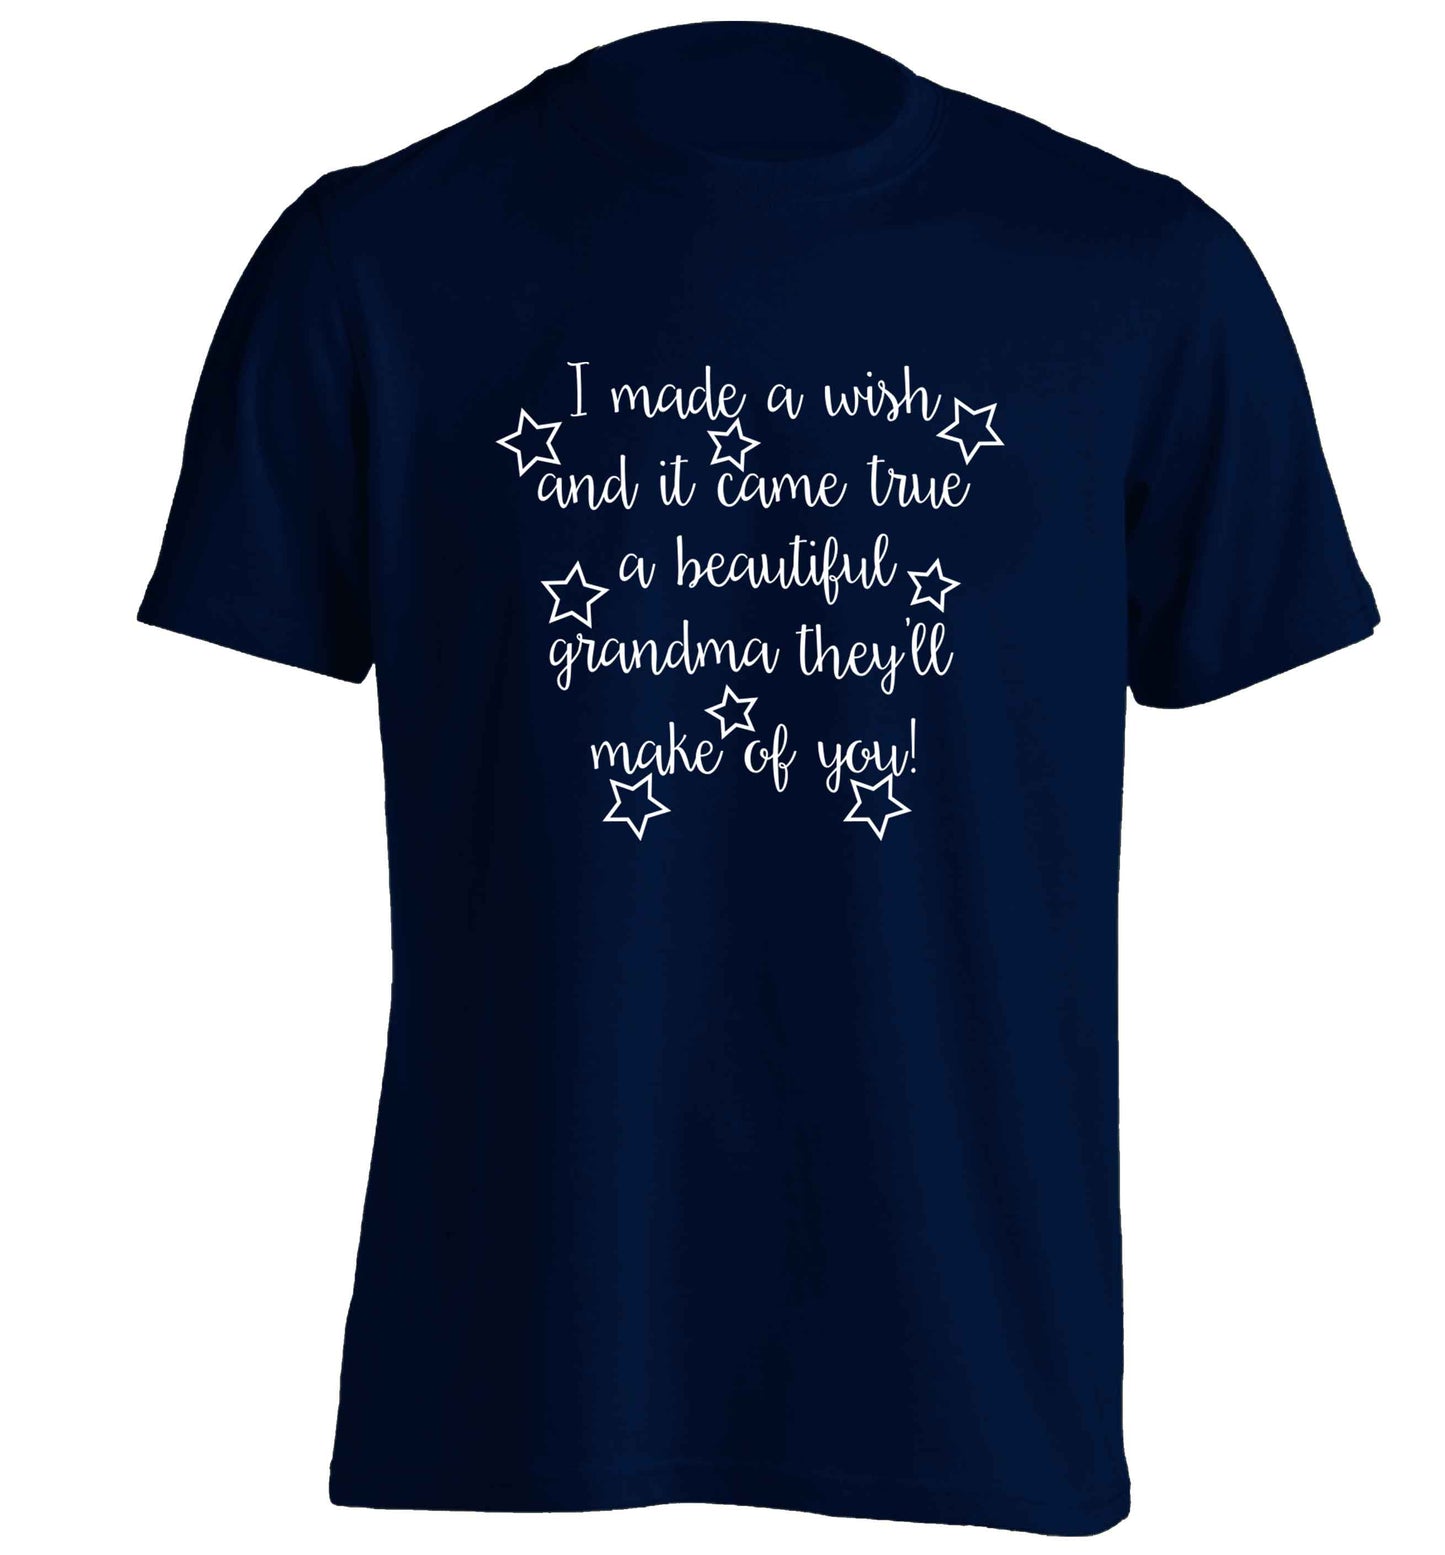 I made a wish and it came true a beautiful grandma they'll make of you! adults unisex navy Tshirt 2XL